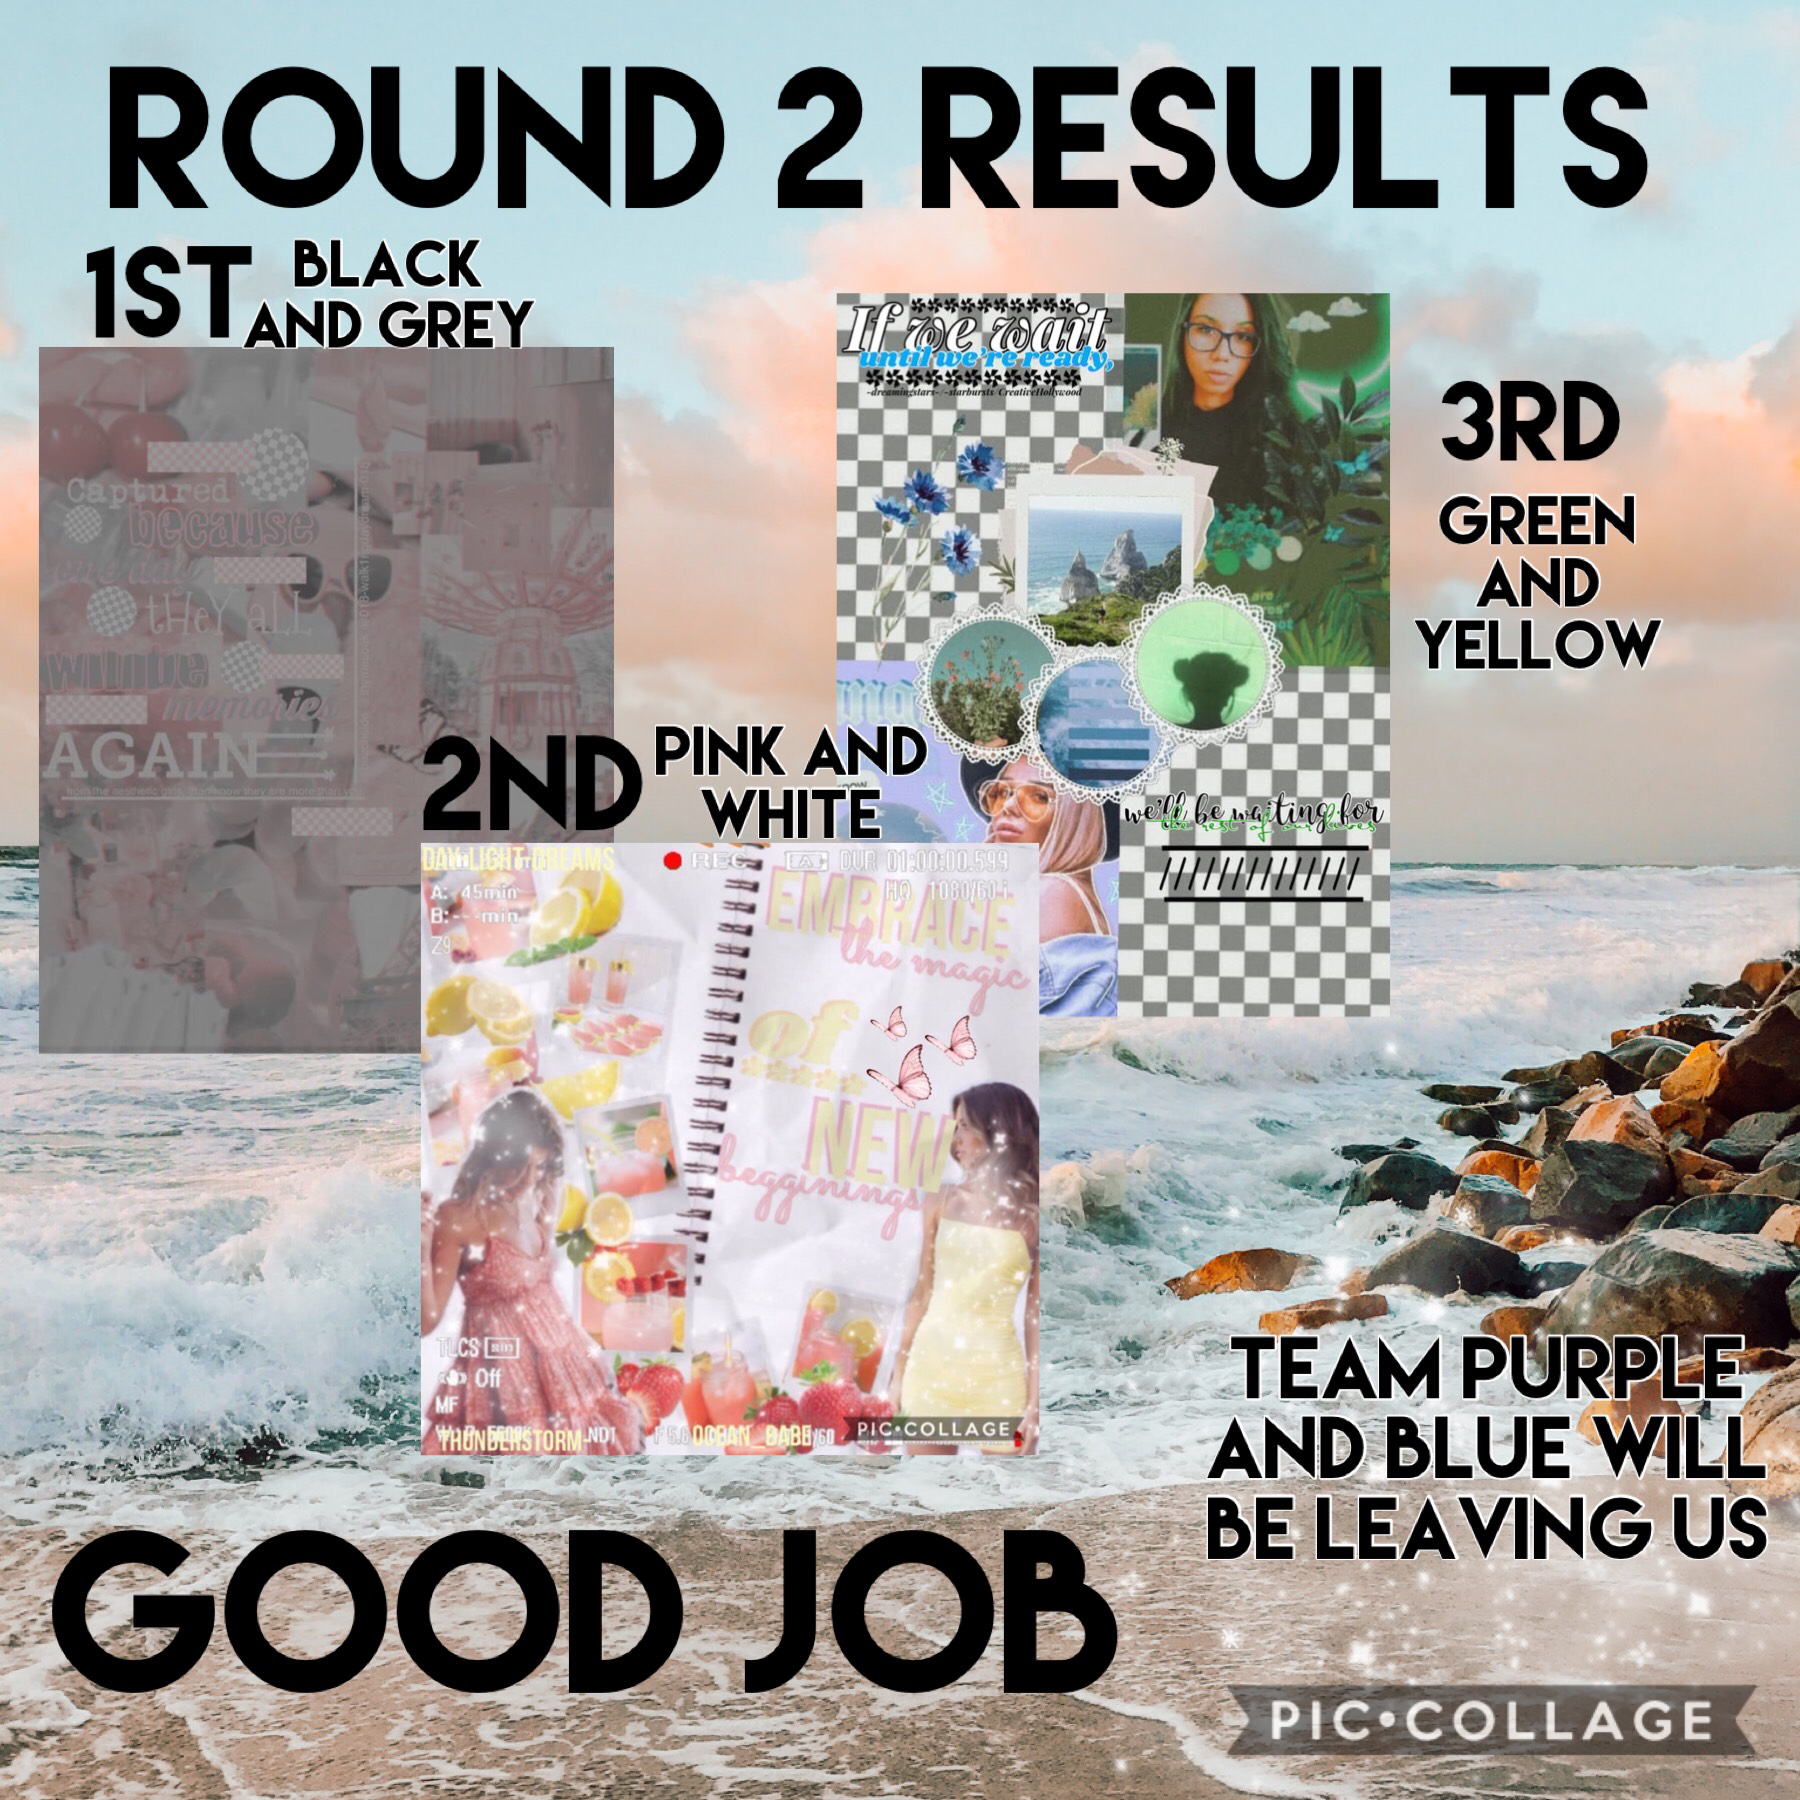 ♥️round 2 results♥️
Were back on for now